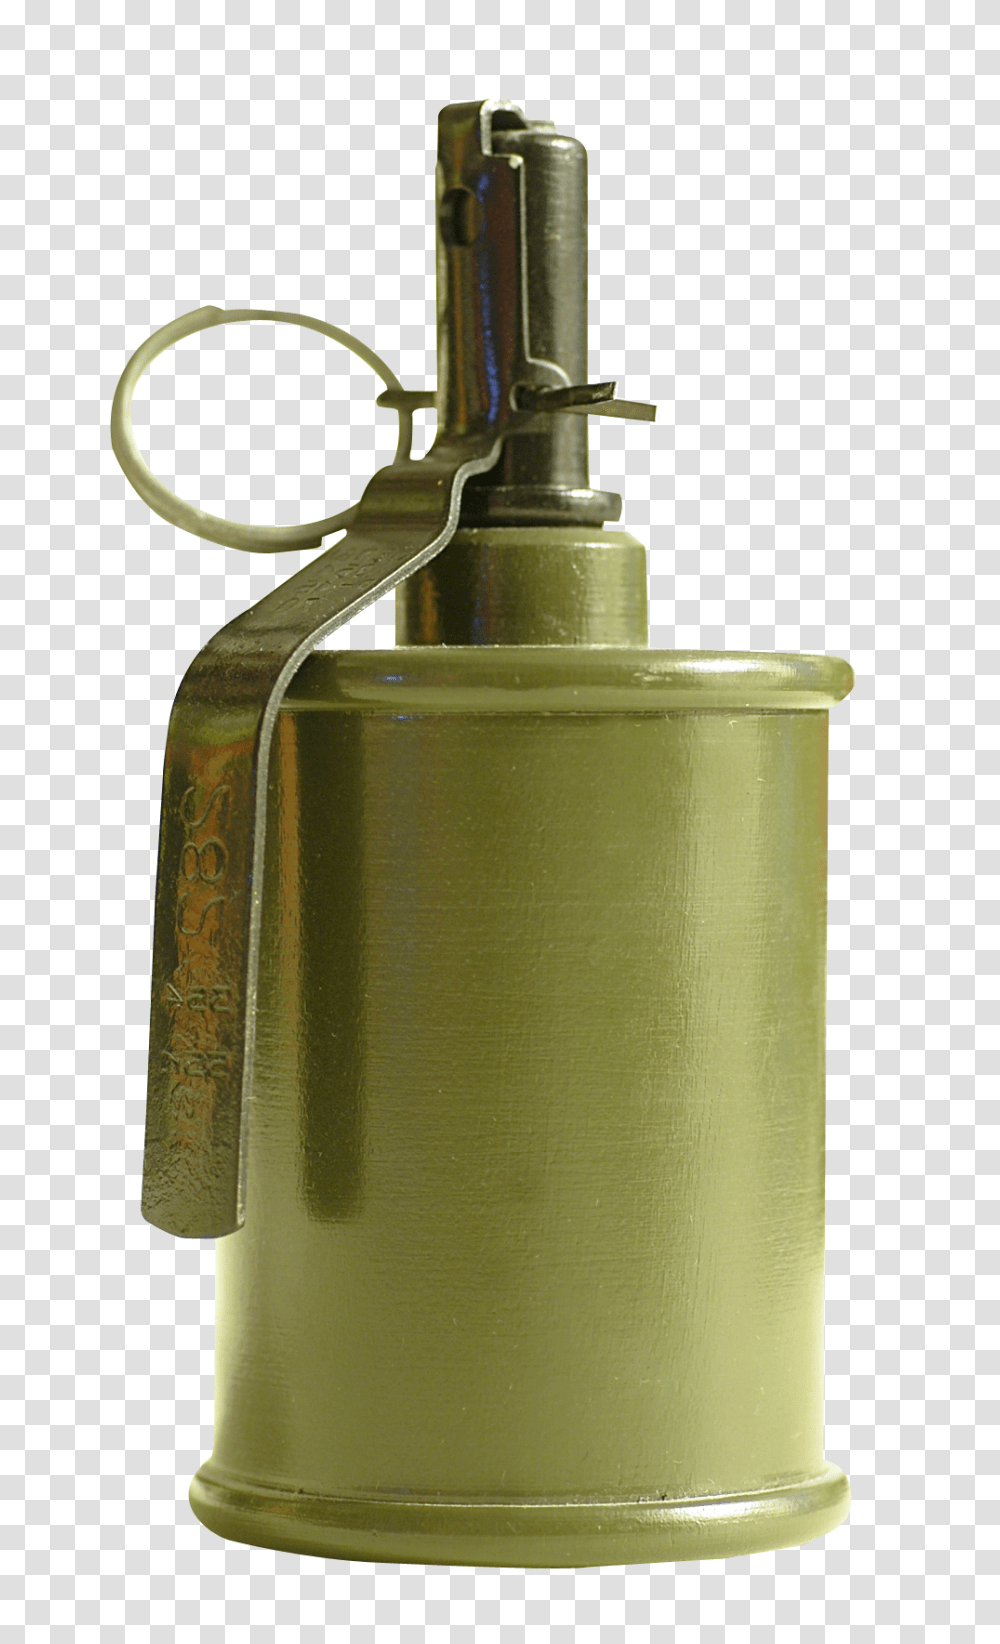 Hand Grenade Image, Weapon, Cylinder, Bomb, Weaponry Transparent Png